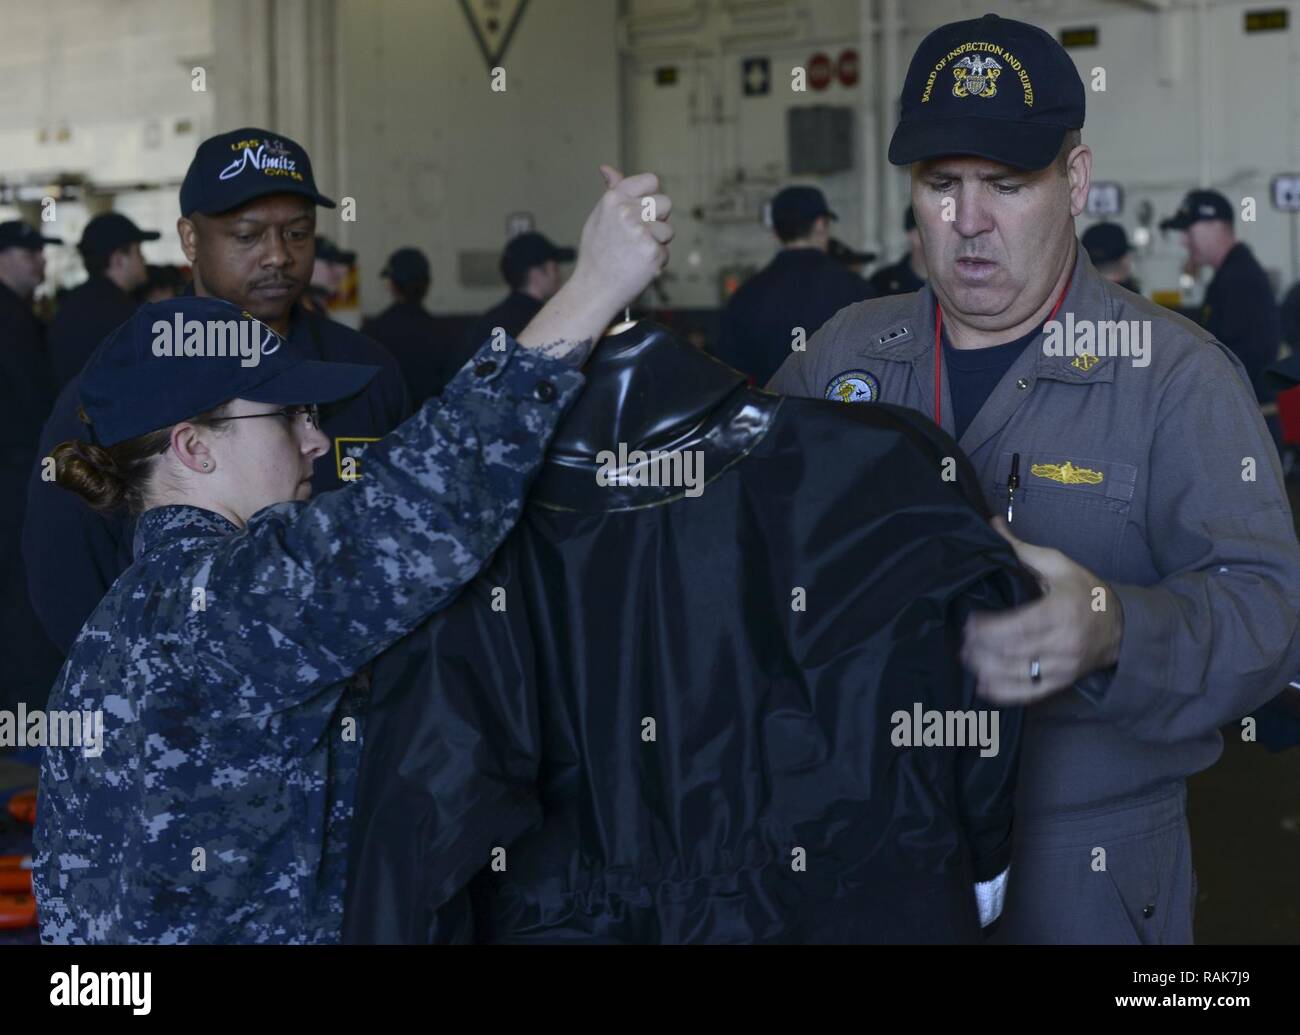 SAN DIEGO (Feb. 13, 2017) - Chief Warrant Officer 4 Richard Barr, a member of the Board of Inspection and Survey (INSURV) team, inspects a search and rescue wetsuit during a demonstration on board the aircraft carrier USS Nimitz (CVN 68). Nimitz is currently undergoing INSURV in preparation for an upcoming 2017 deployment. Stock Photo